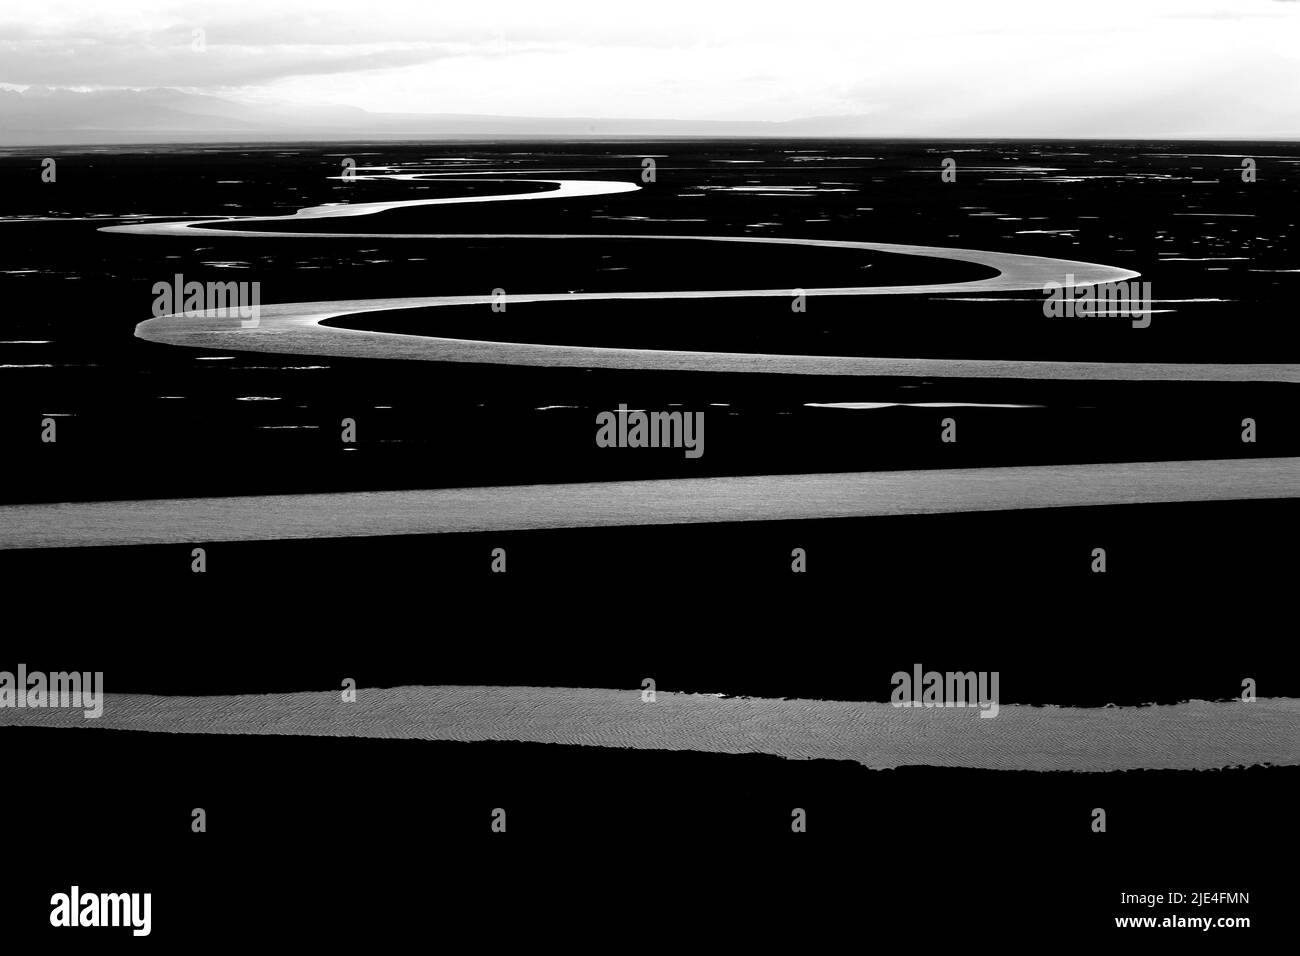 Hydrophytes Black and White Stock Photos & Images - Alamy